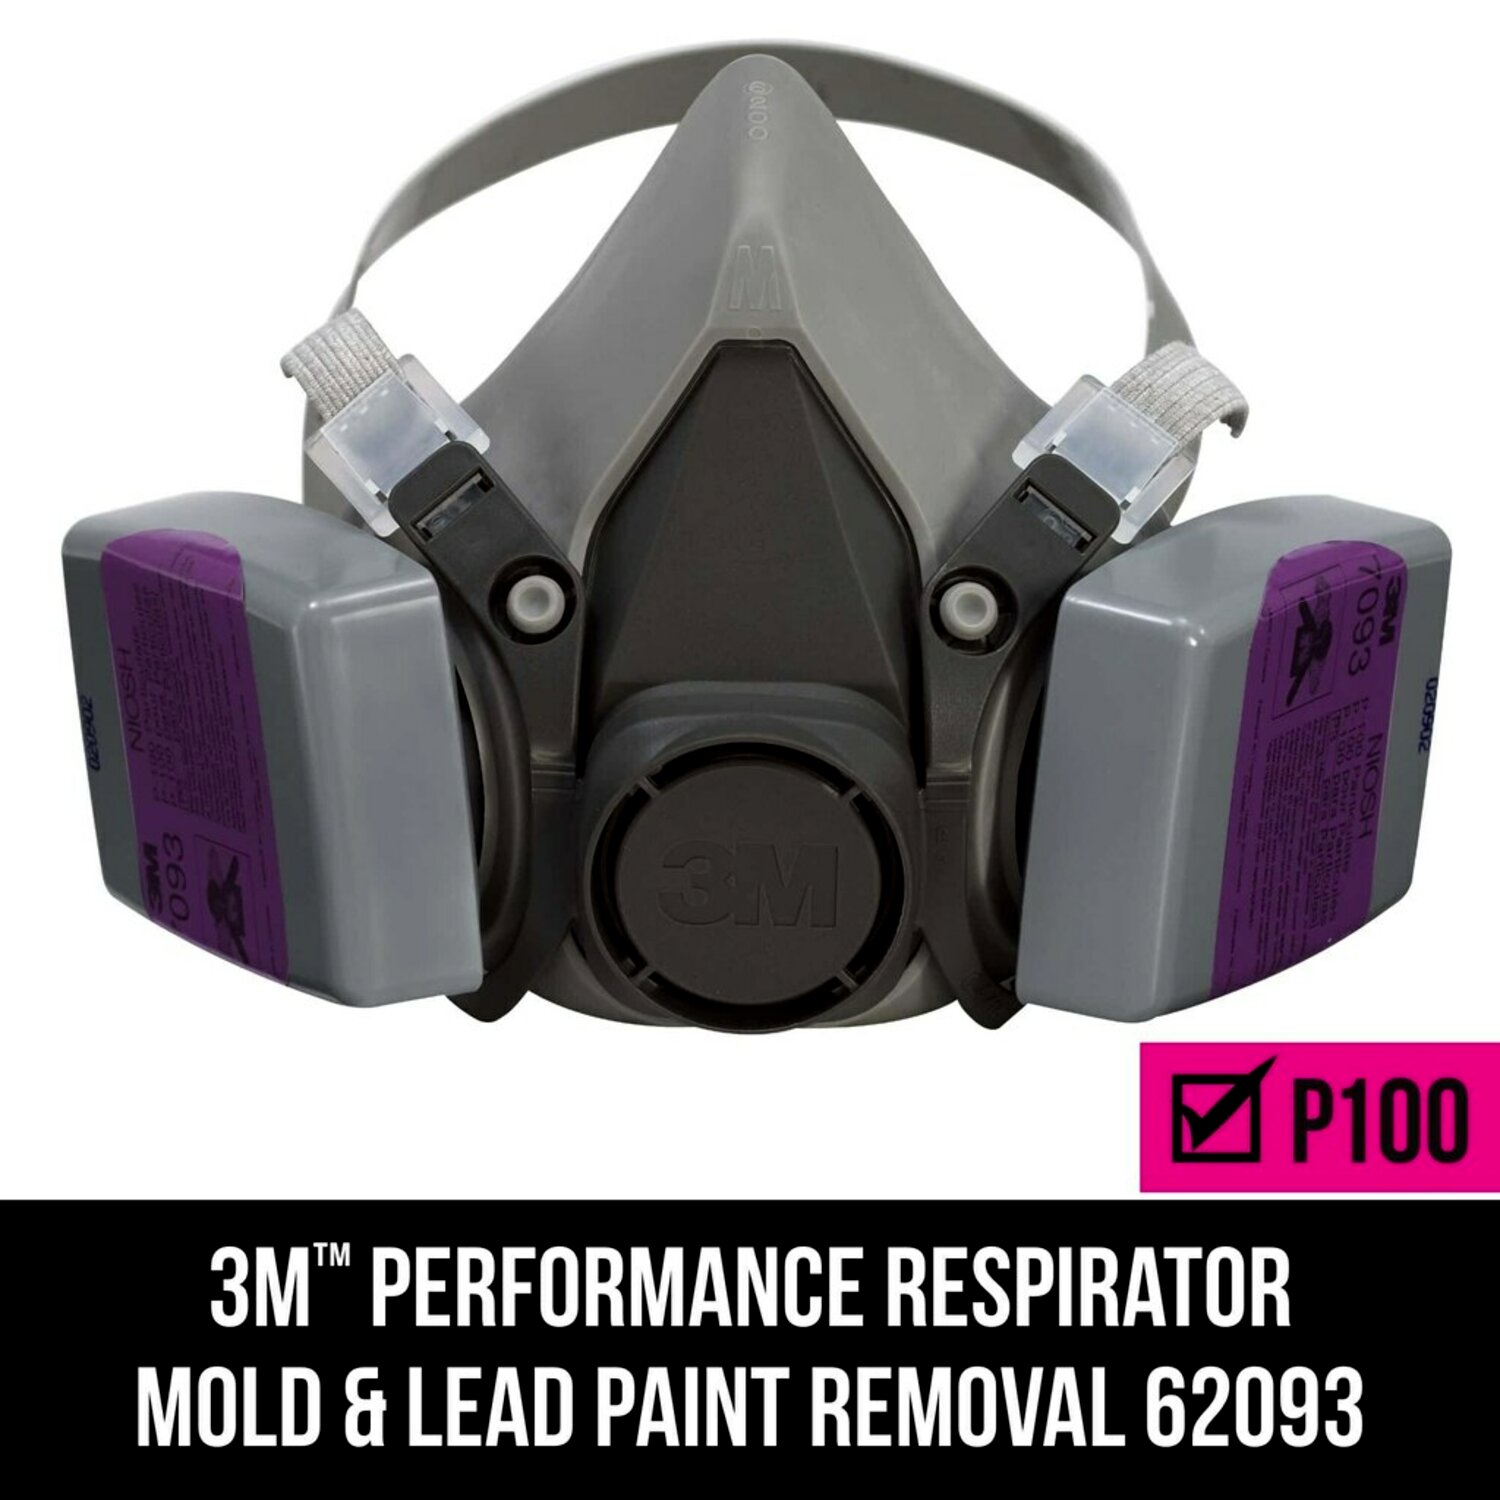 7100159819 - 3M Lead Paint Removal Respirator, 62093H1-DC, 1 each/pack, 4 packs/case